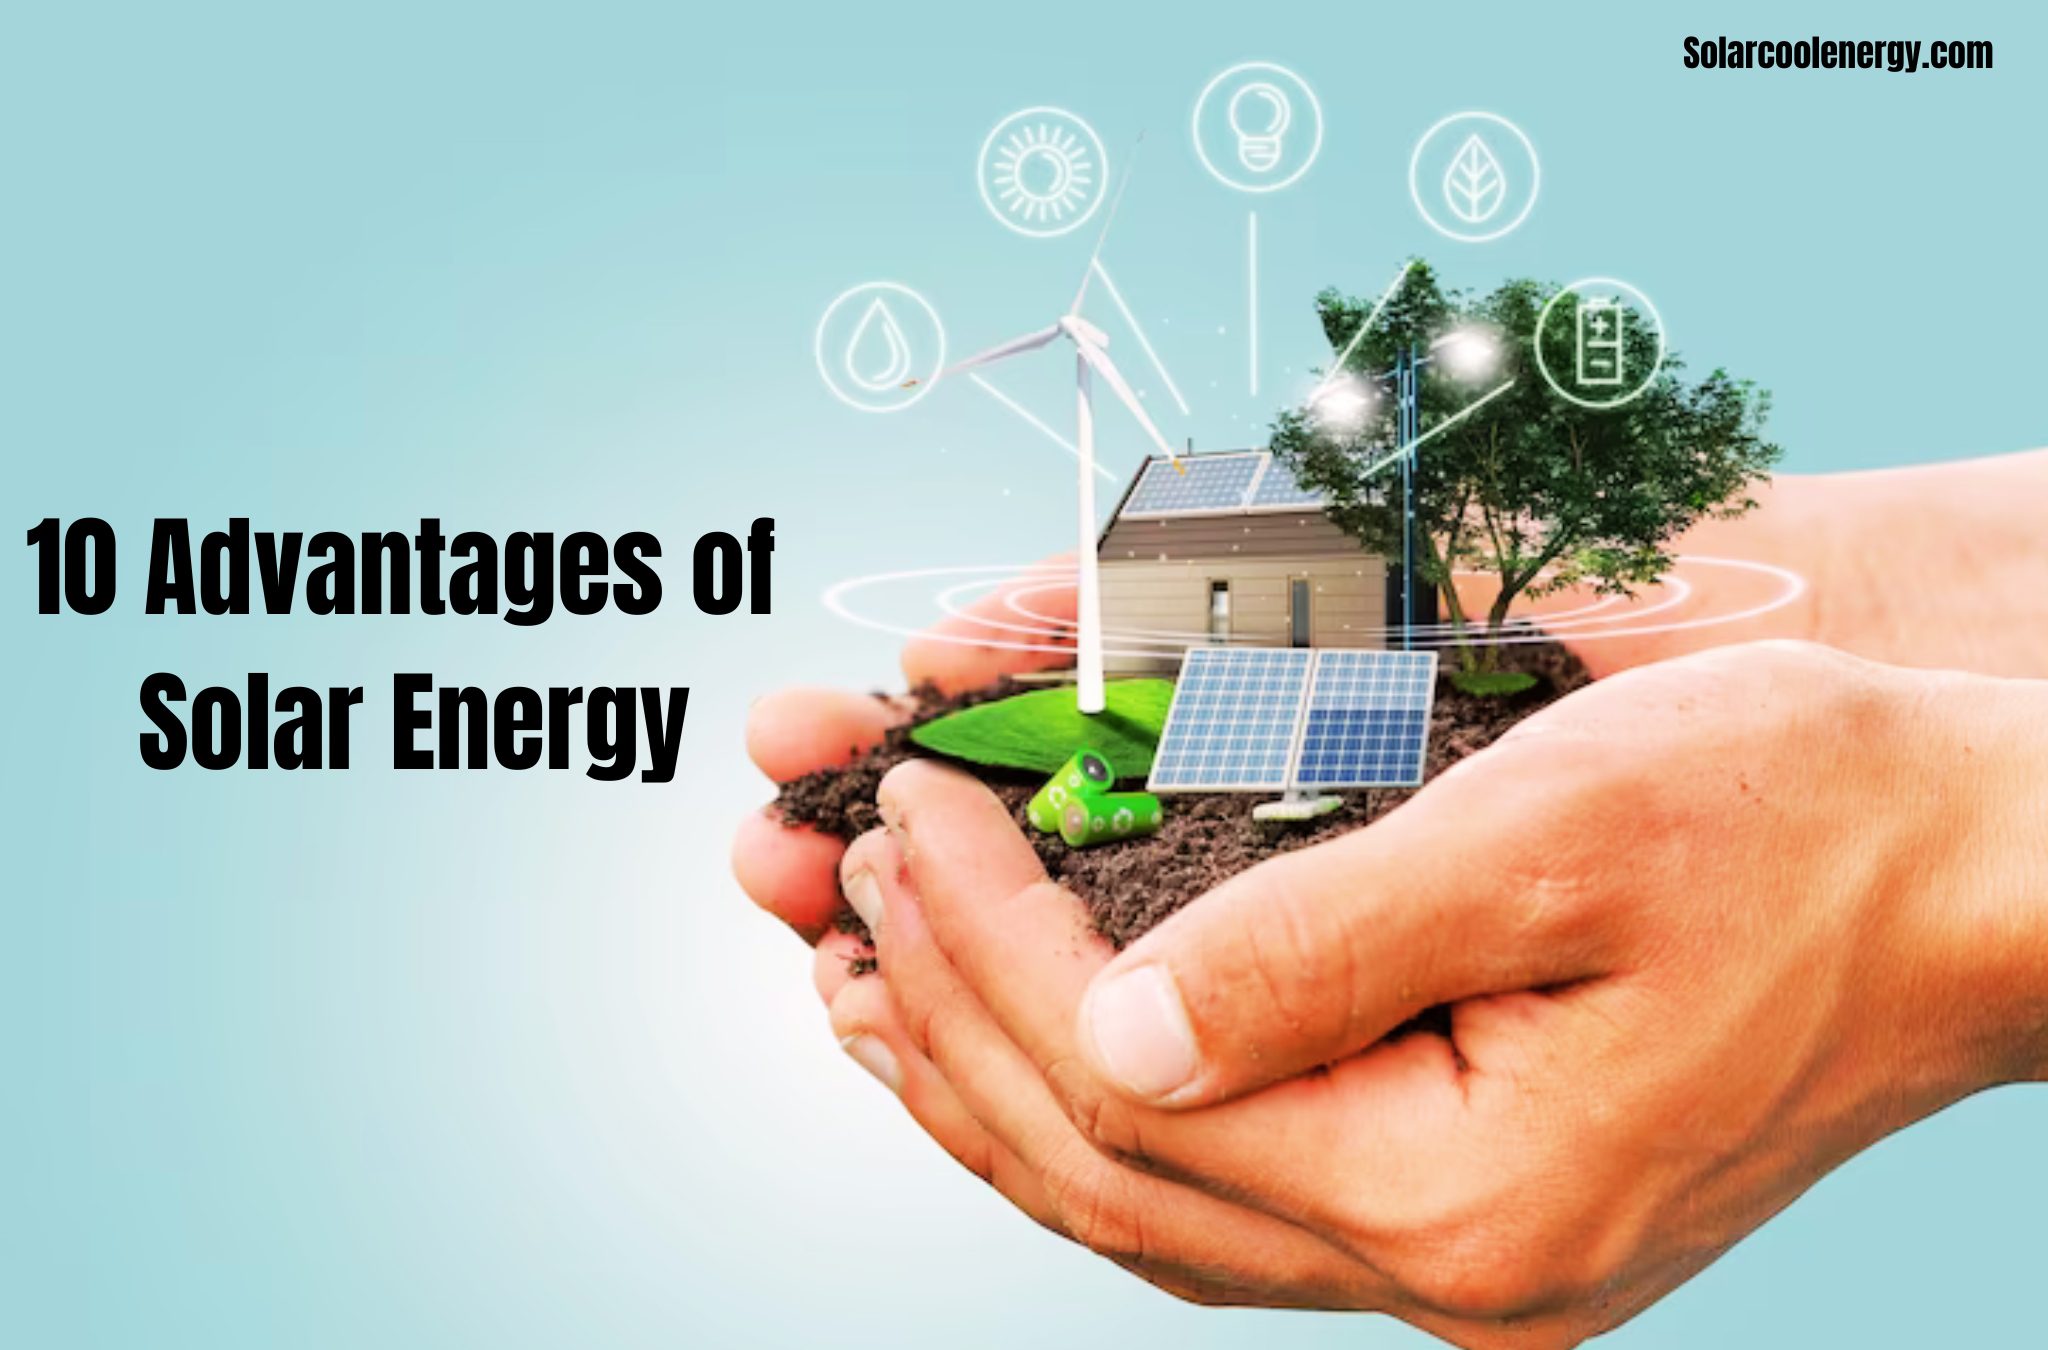 What Are 10 Advantages of Solar Energy